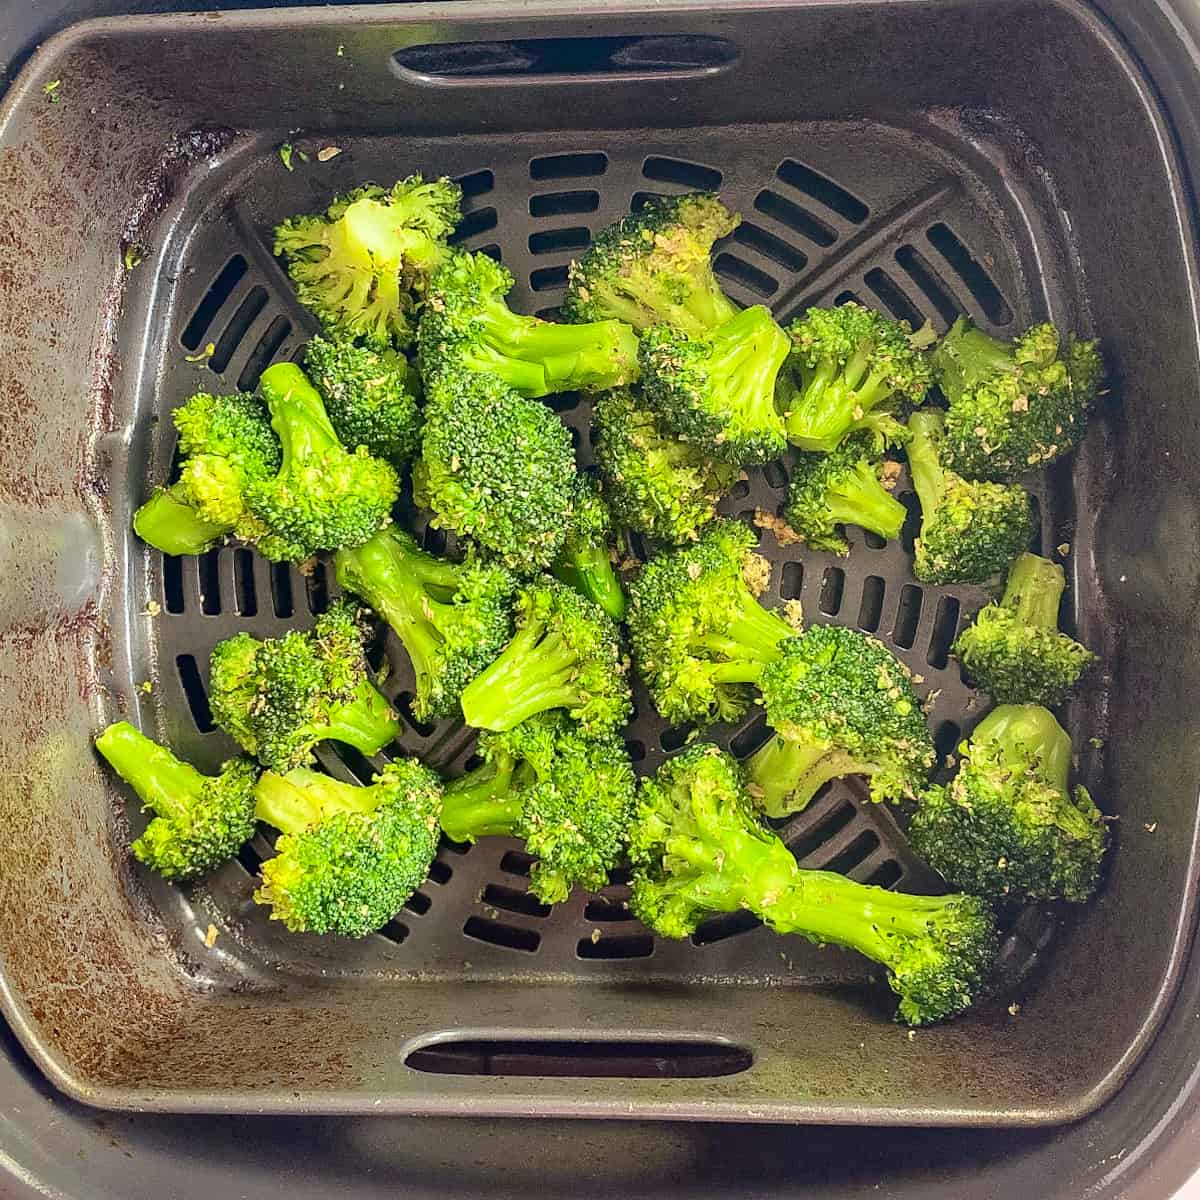 Cooking frozen broccoli in the air fryer.